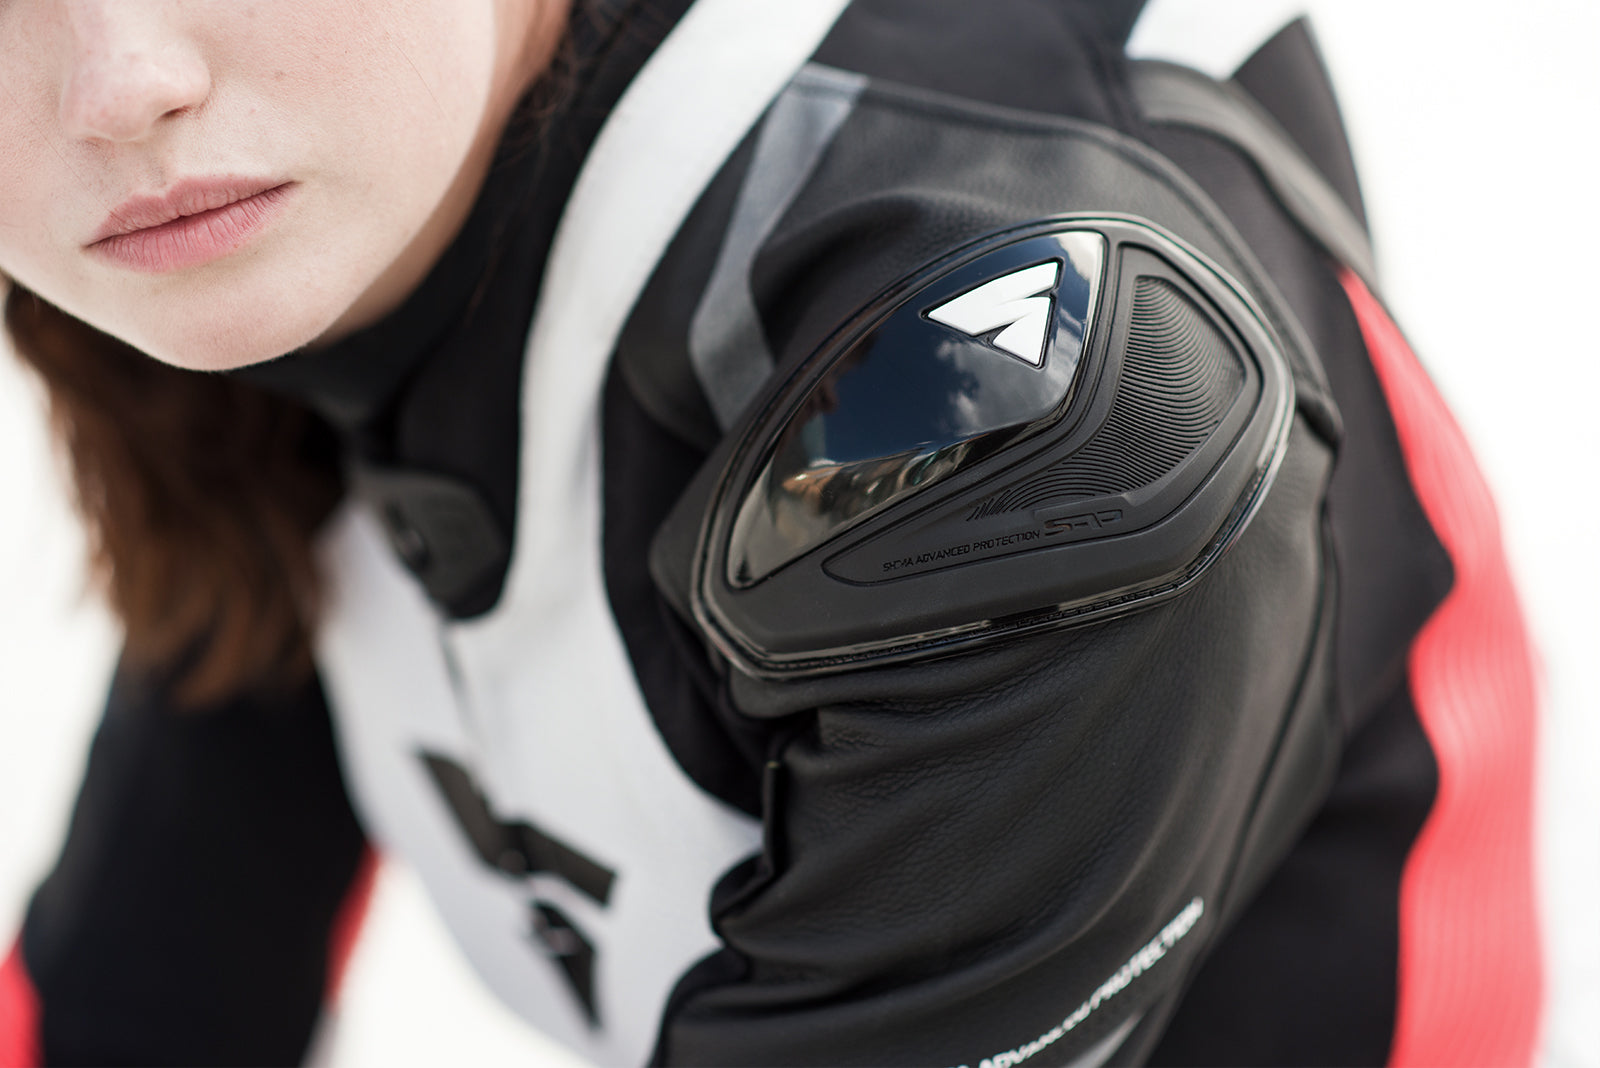 A close up of woman's shoulder wearing Women's racing suit MIURA RS in black, white and fluo from Shima 